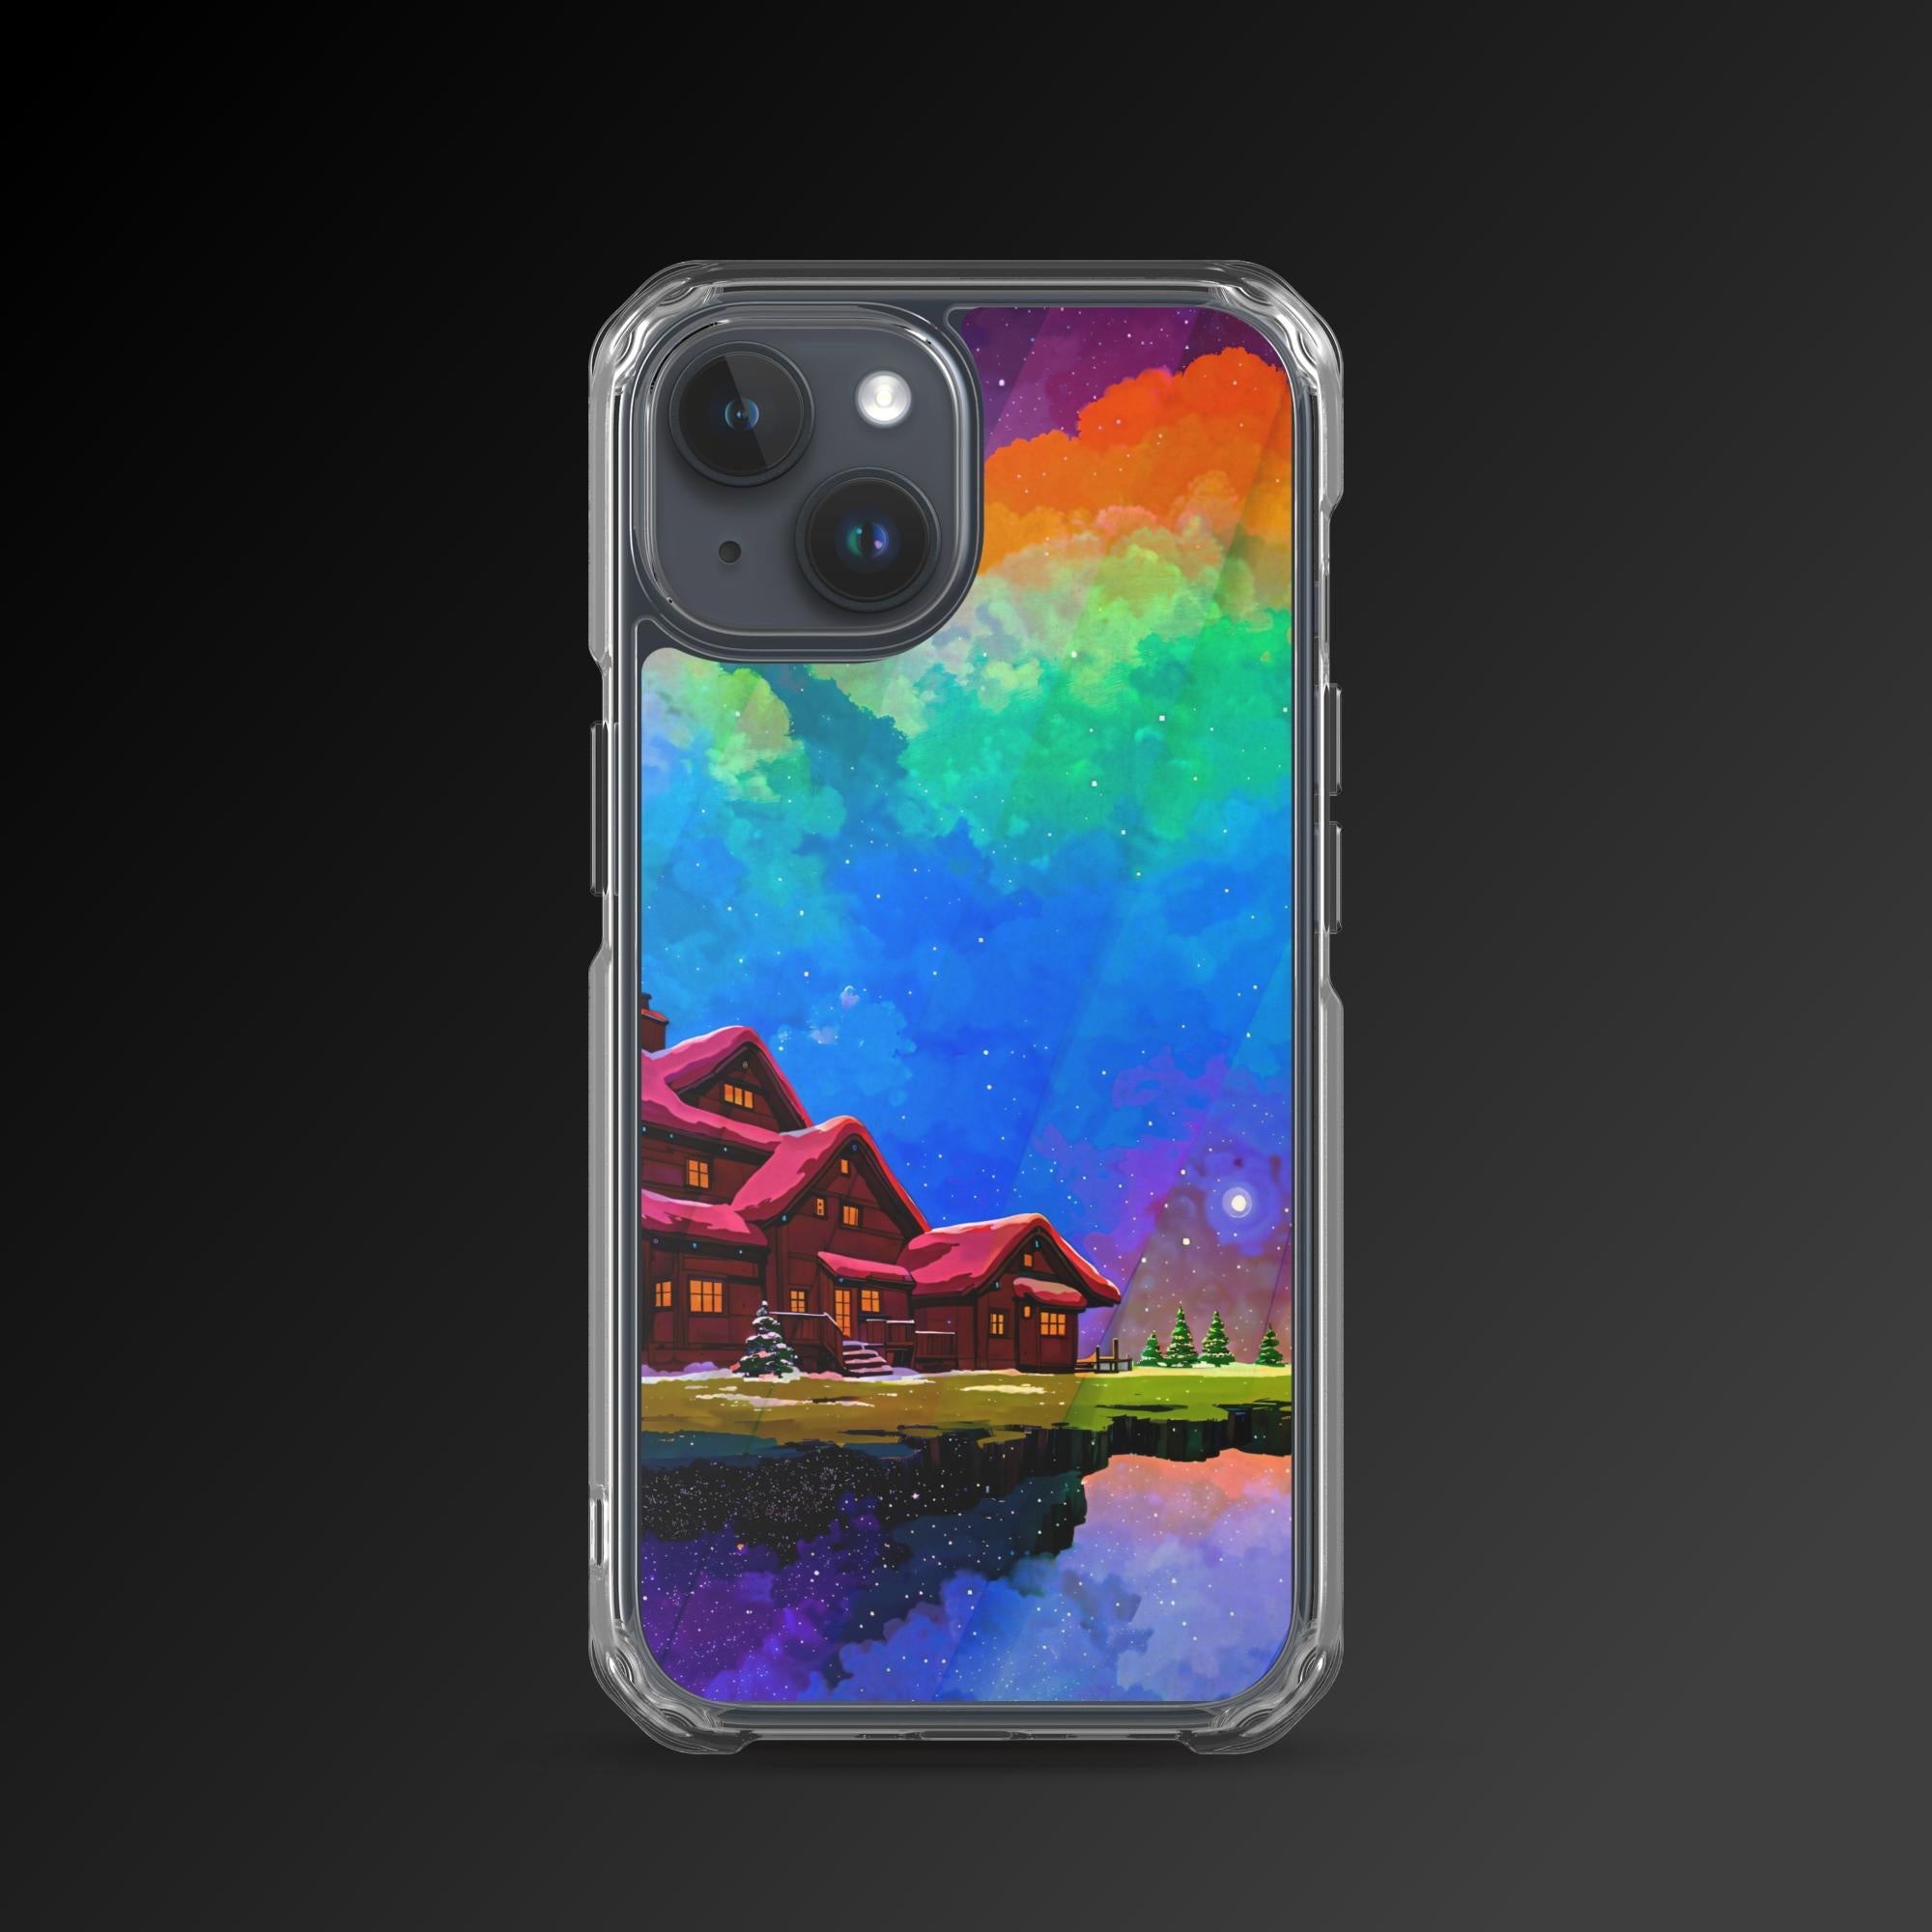 "Universal inn" clear iphone case - Clear iphone case - Ever colorful